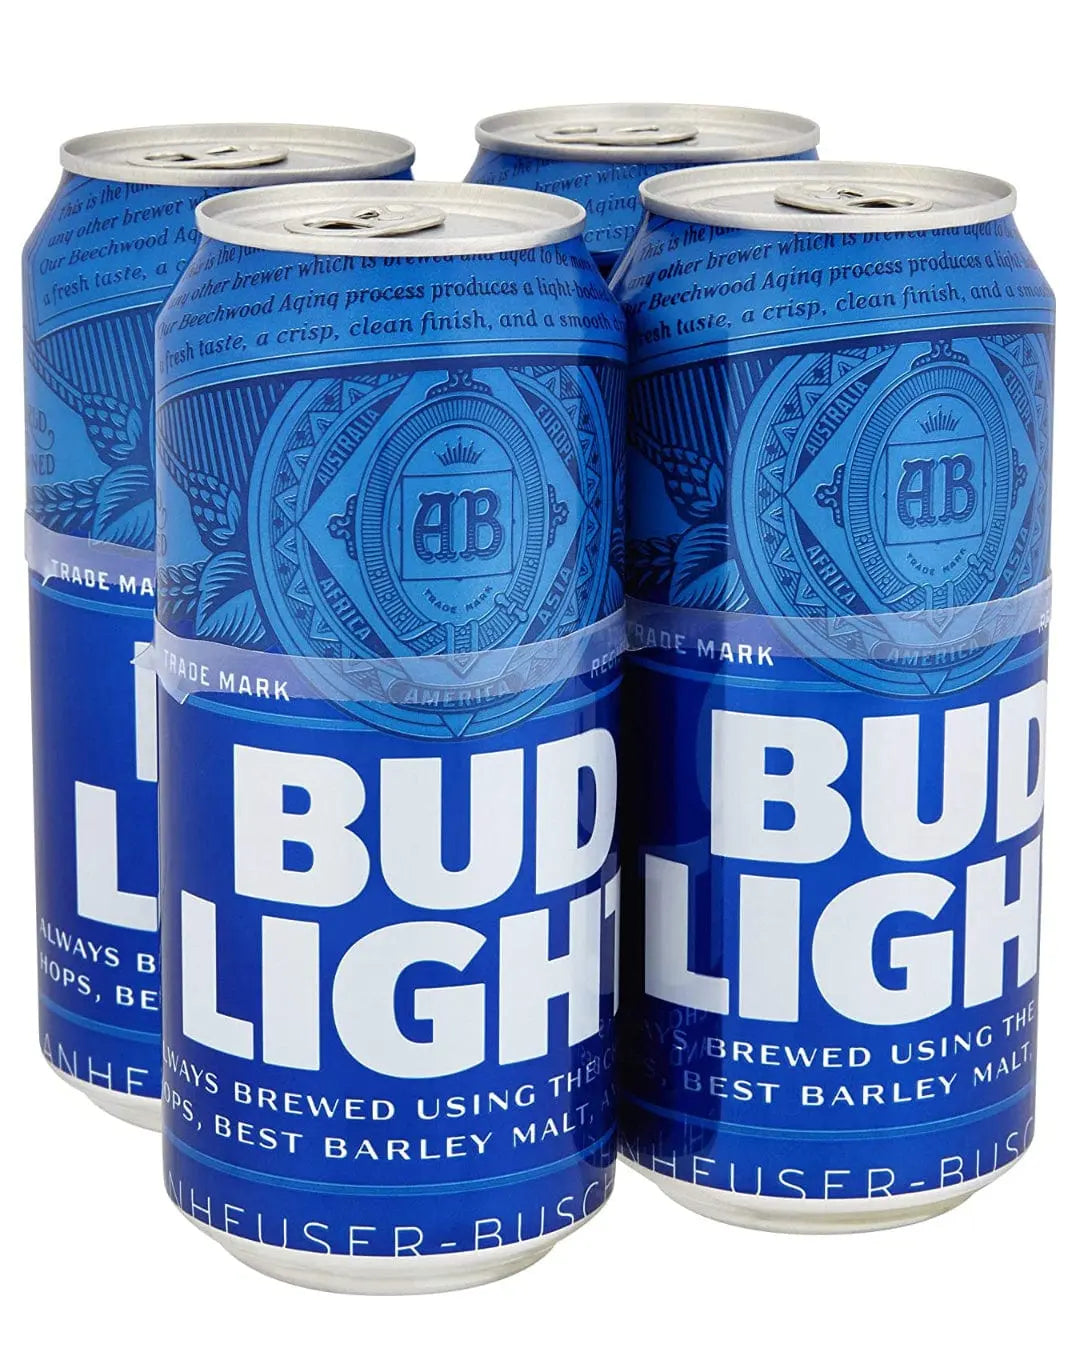 Bud Light Lager Beer Cans, 4 x 440 ml Beer